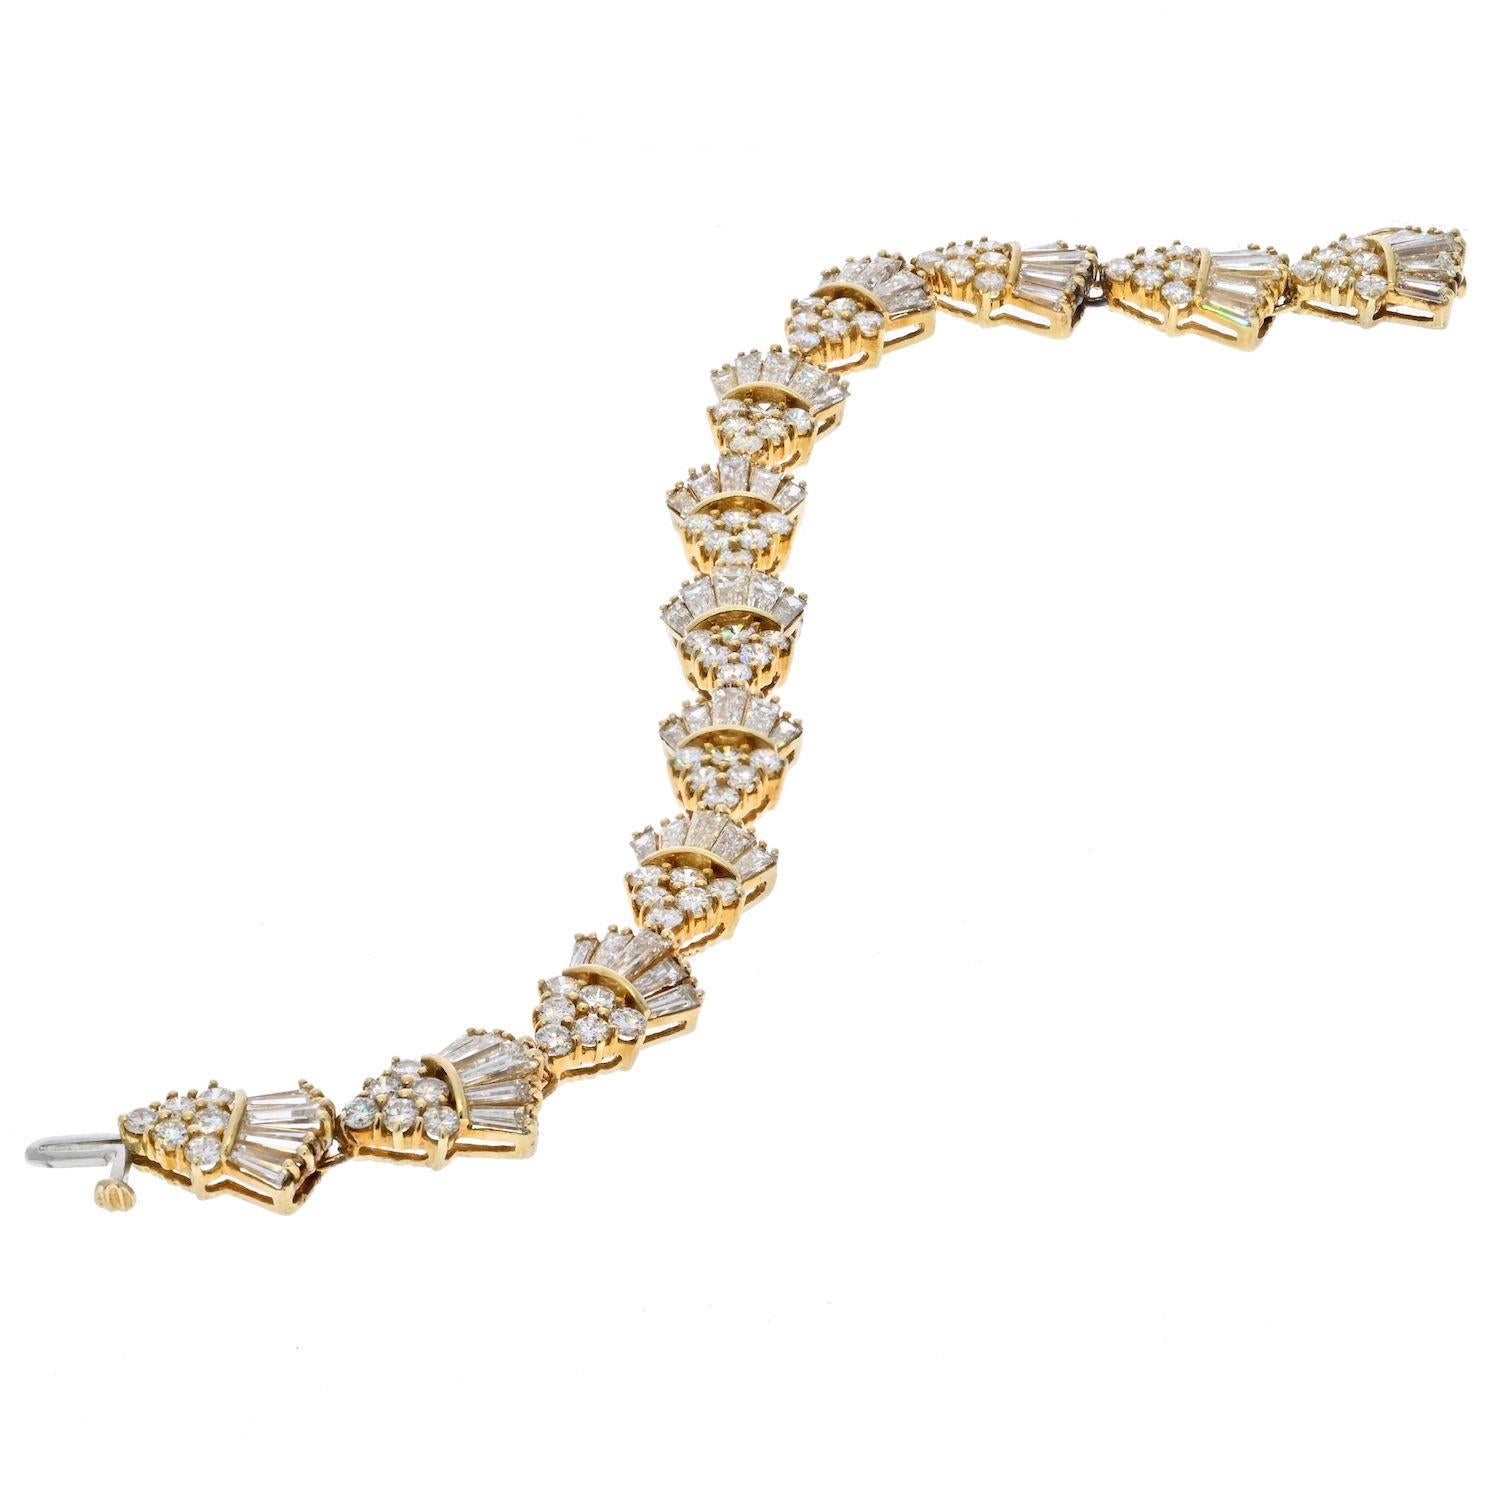 Lovely estate bracelet for someone with a small wrist size: encrusted with round and baguette cut diamonds all the way around, perfectly sparkly and looks excellent today just like it did 40 years ago.
Closed with the box clasp. 
Bracelet